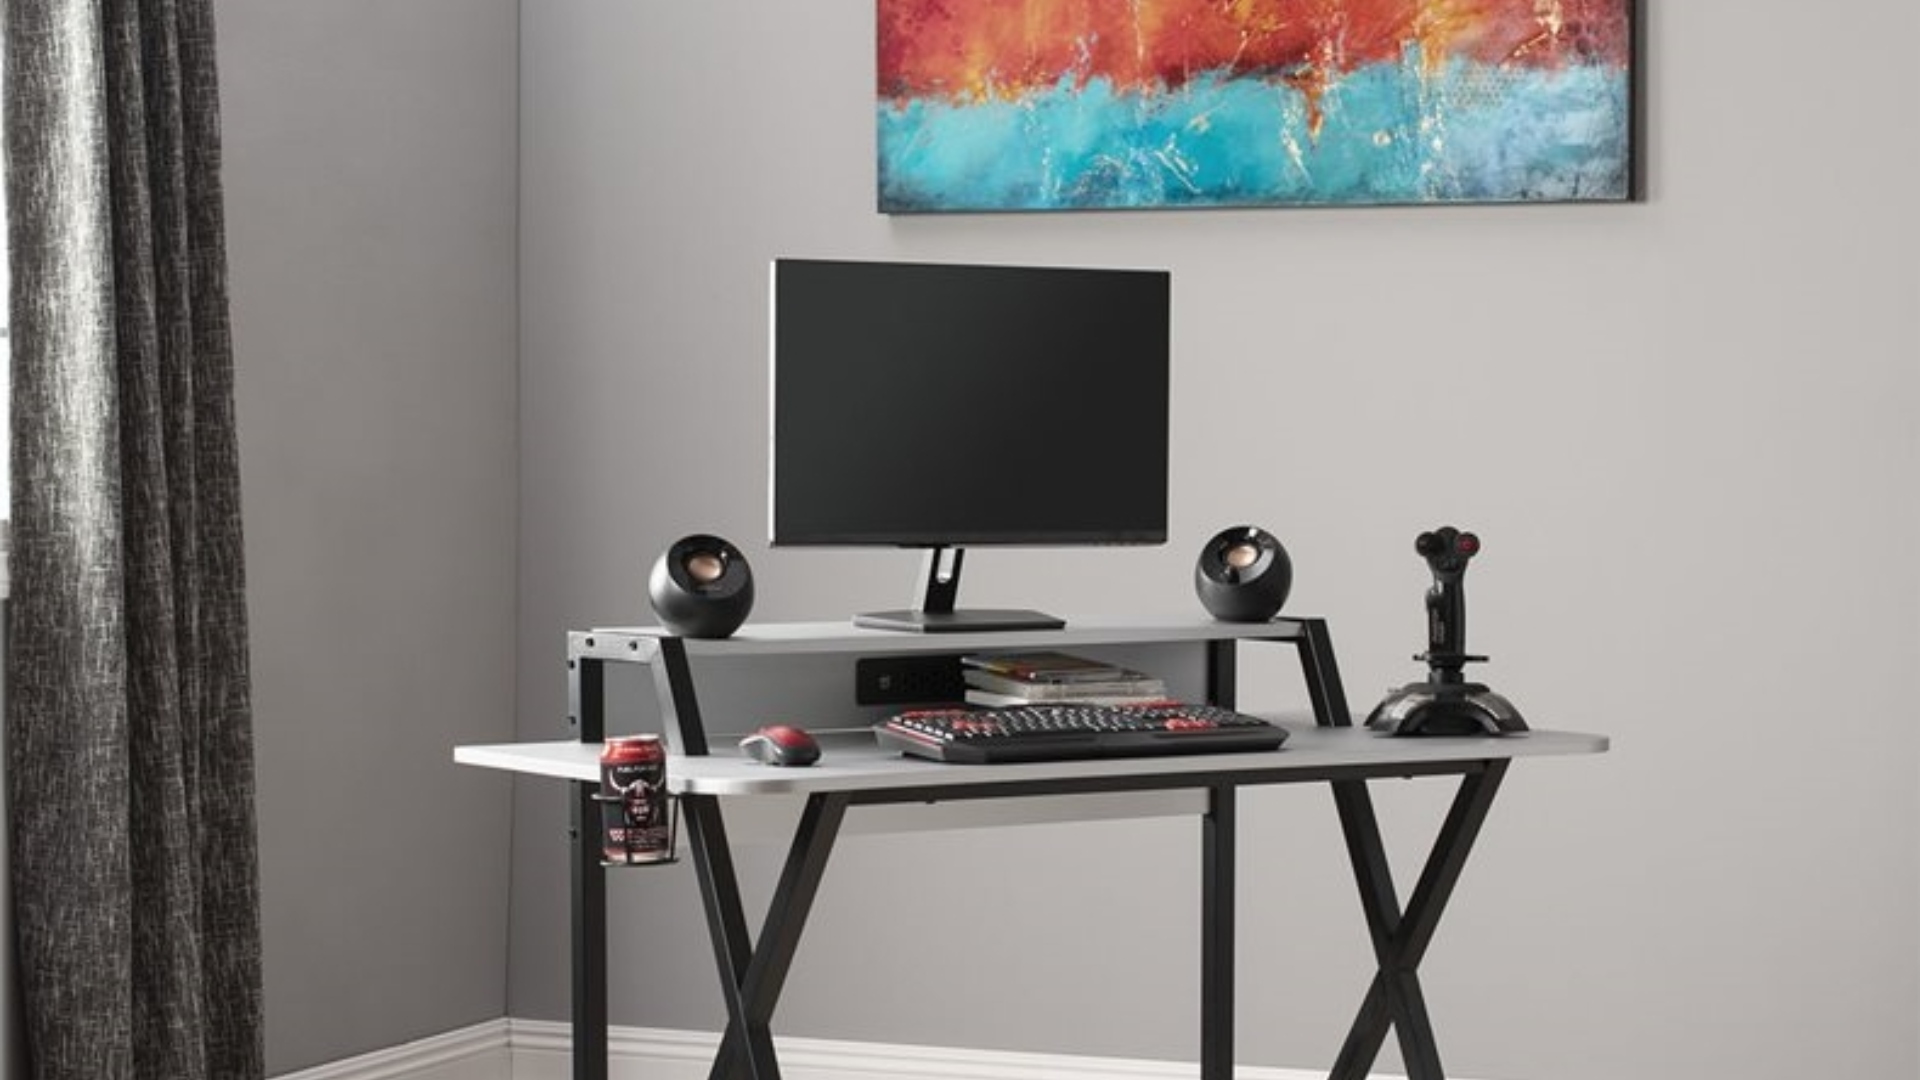 Grab a new Challenger gaming desk for under $200 at Best Buy